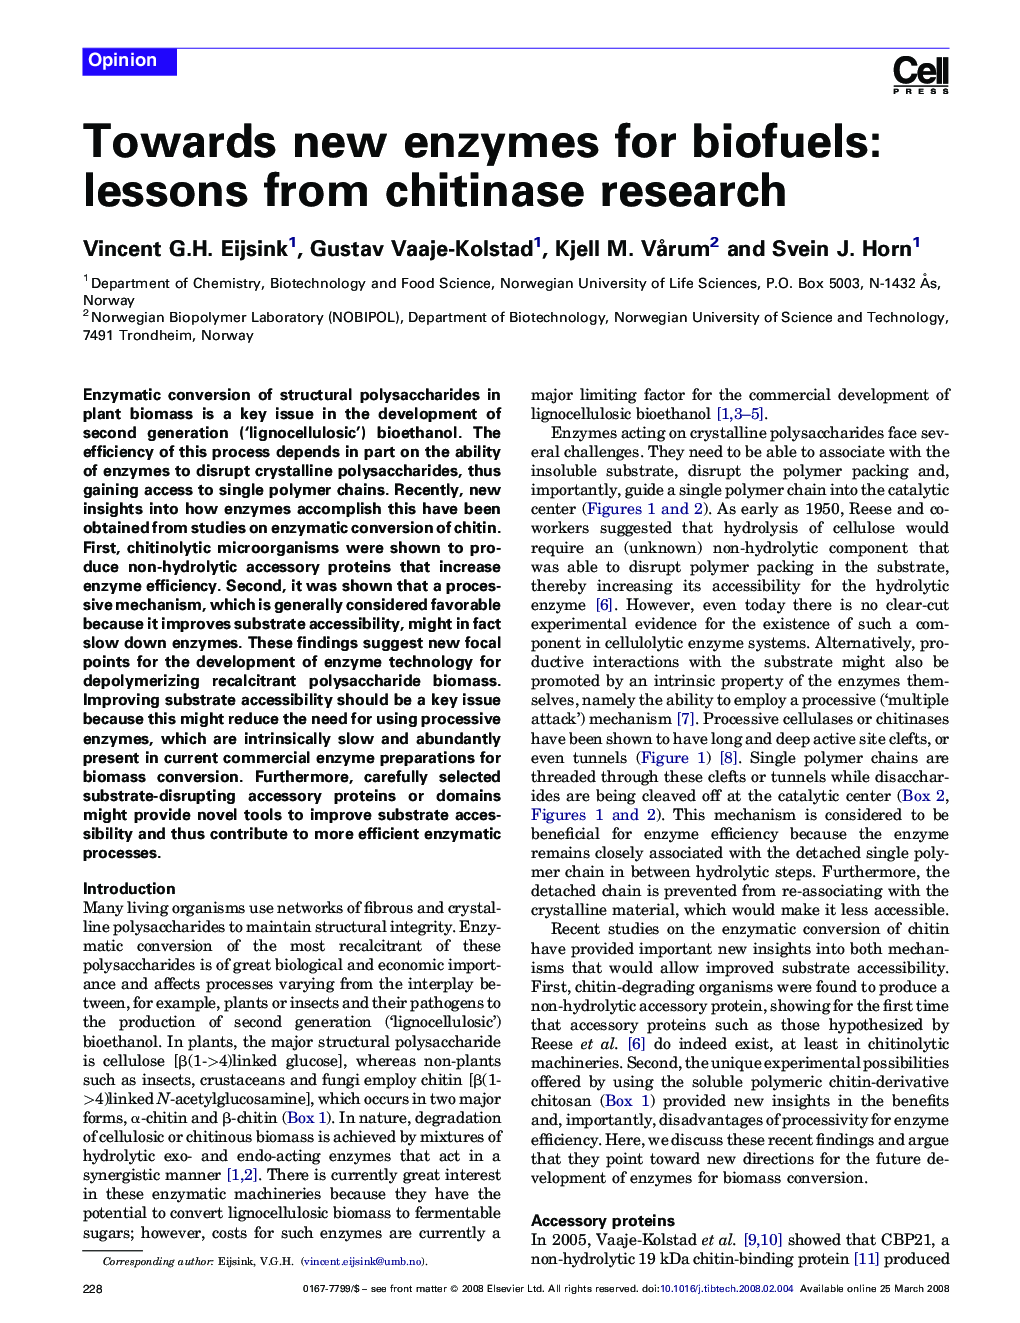 Towards new enzymes for biofuels: lessons from chitinase research